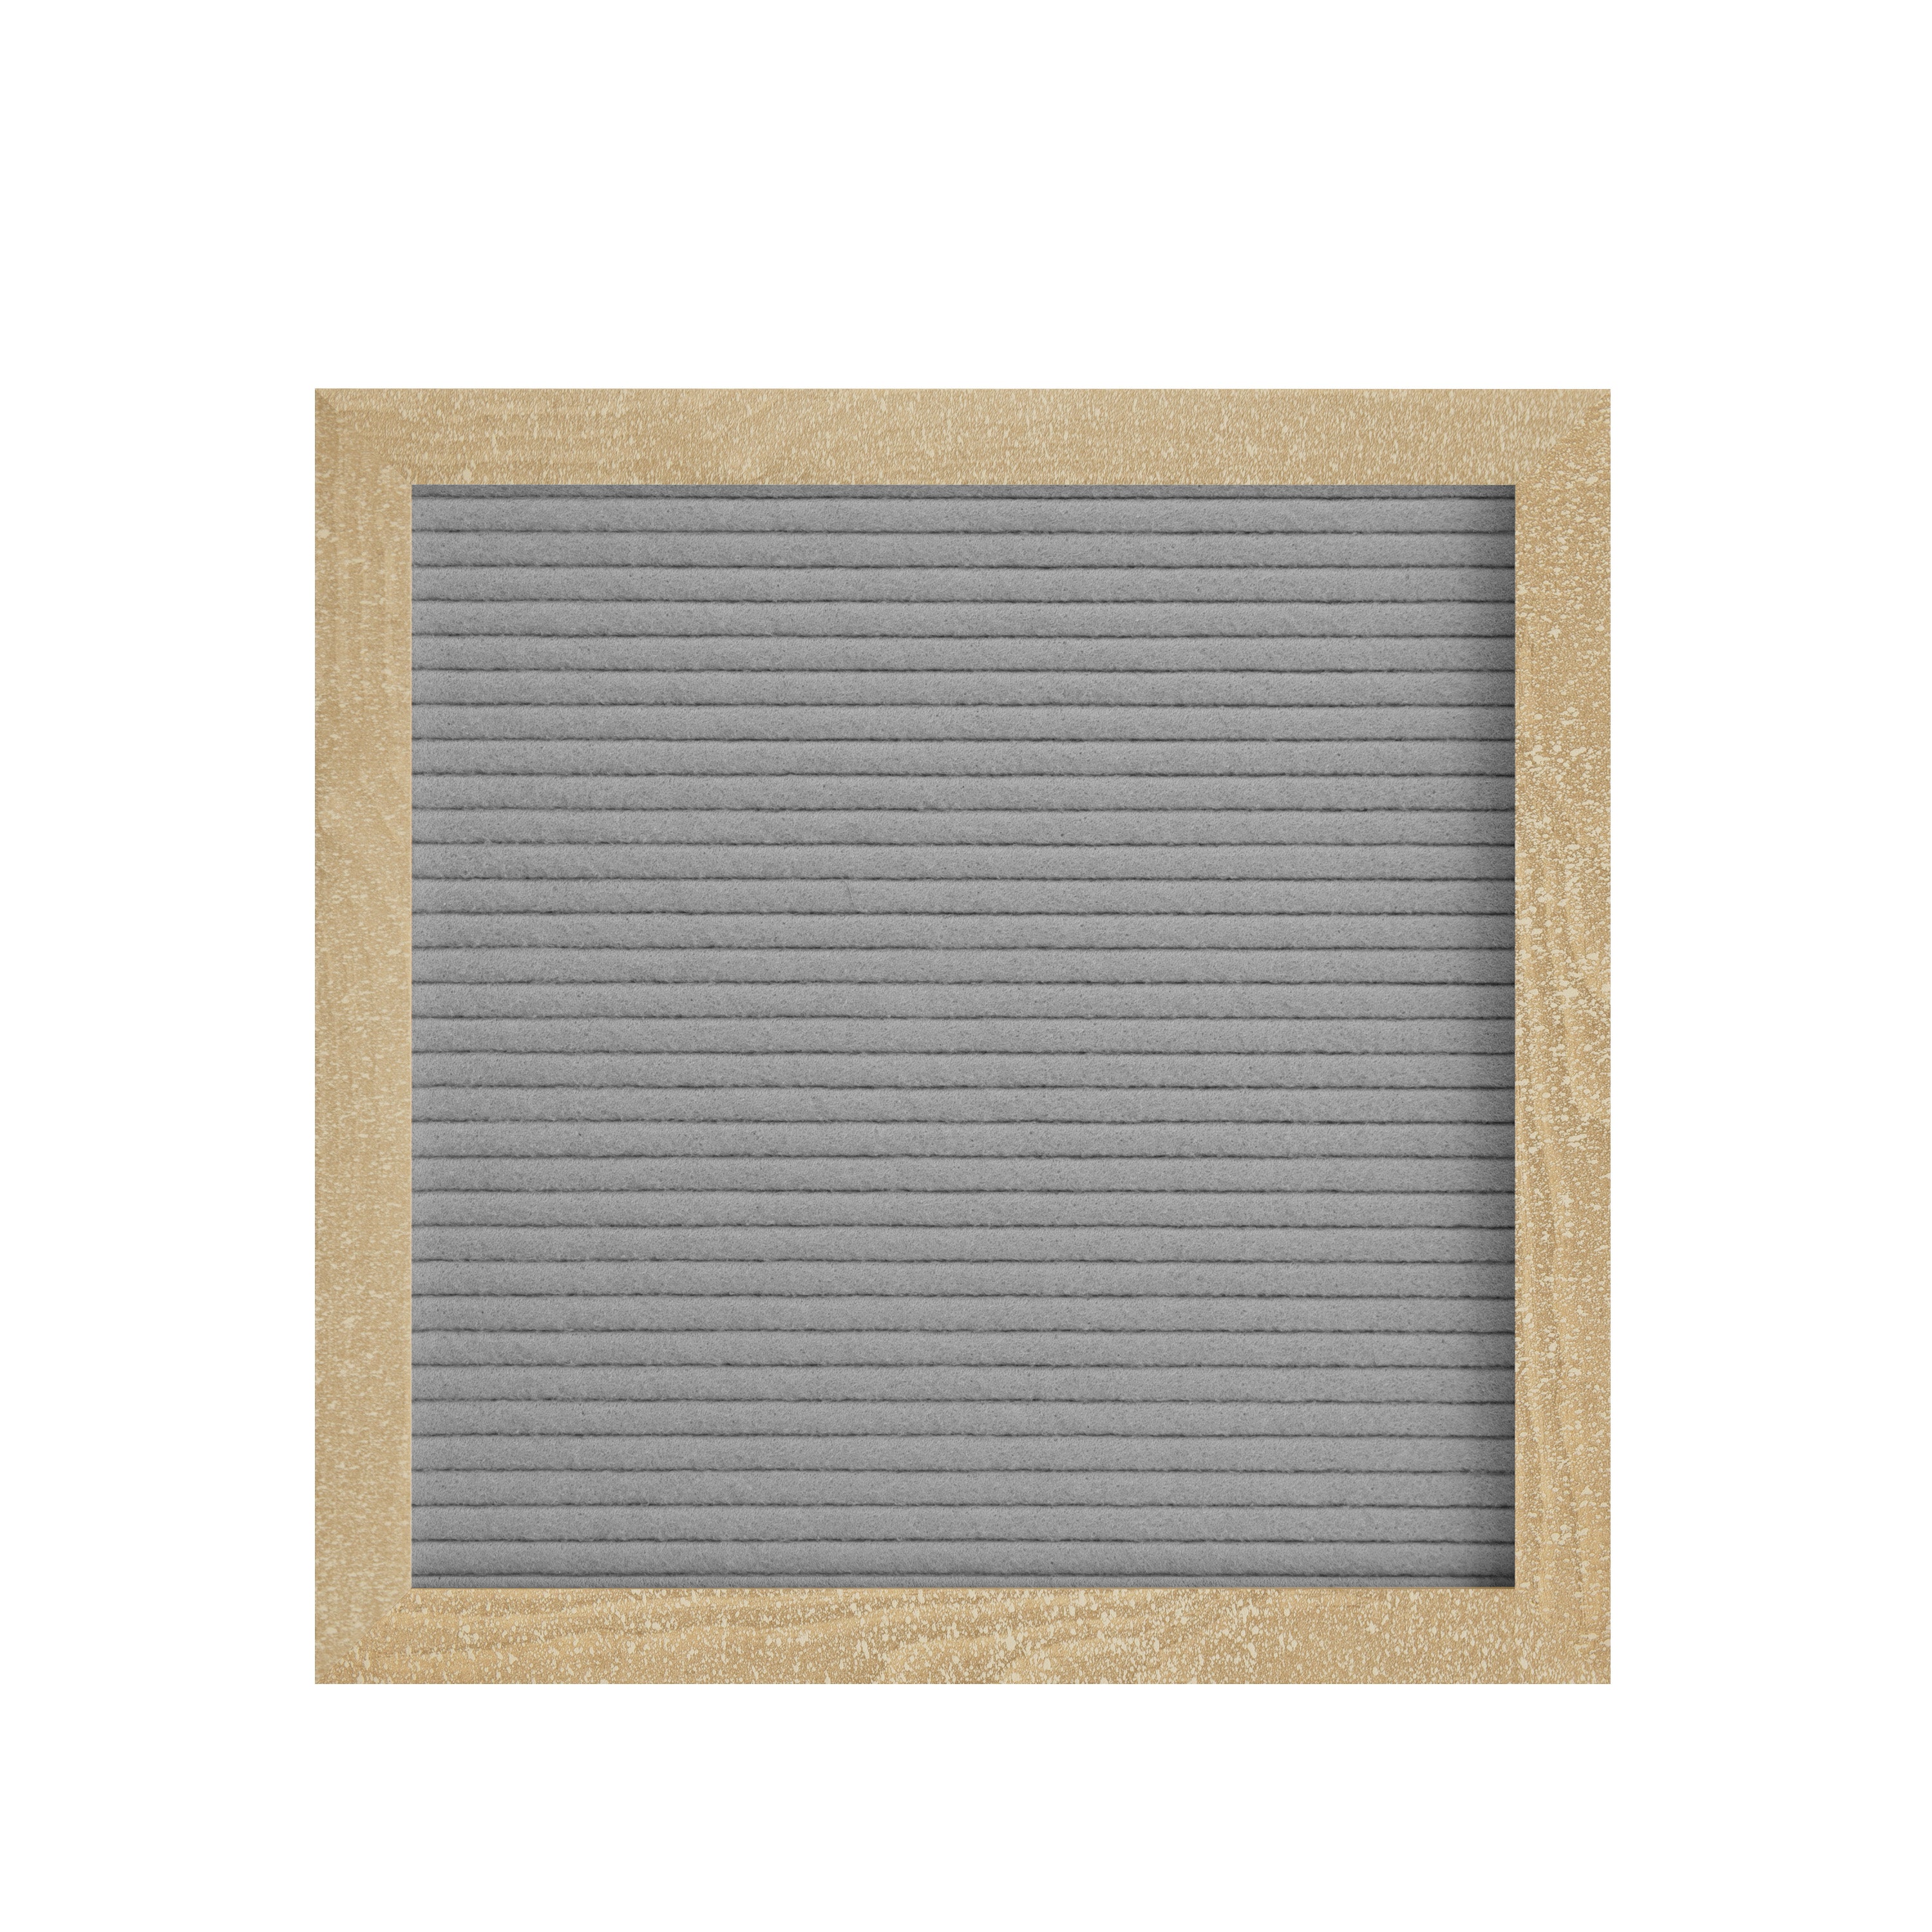 Gracie Felt Letter Board with Wooden Frame, 389 PP Letters Including Numbers, Symbols and Icons, Canvas Carrying Case-Felt Letter Boards-Flash Furniture-Wall2Wall Furnishings